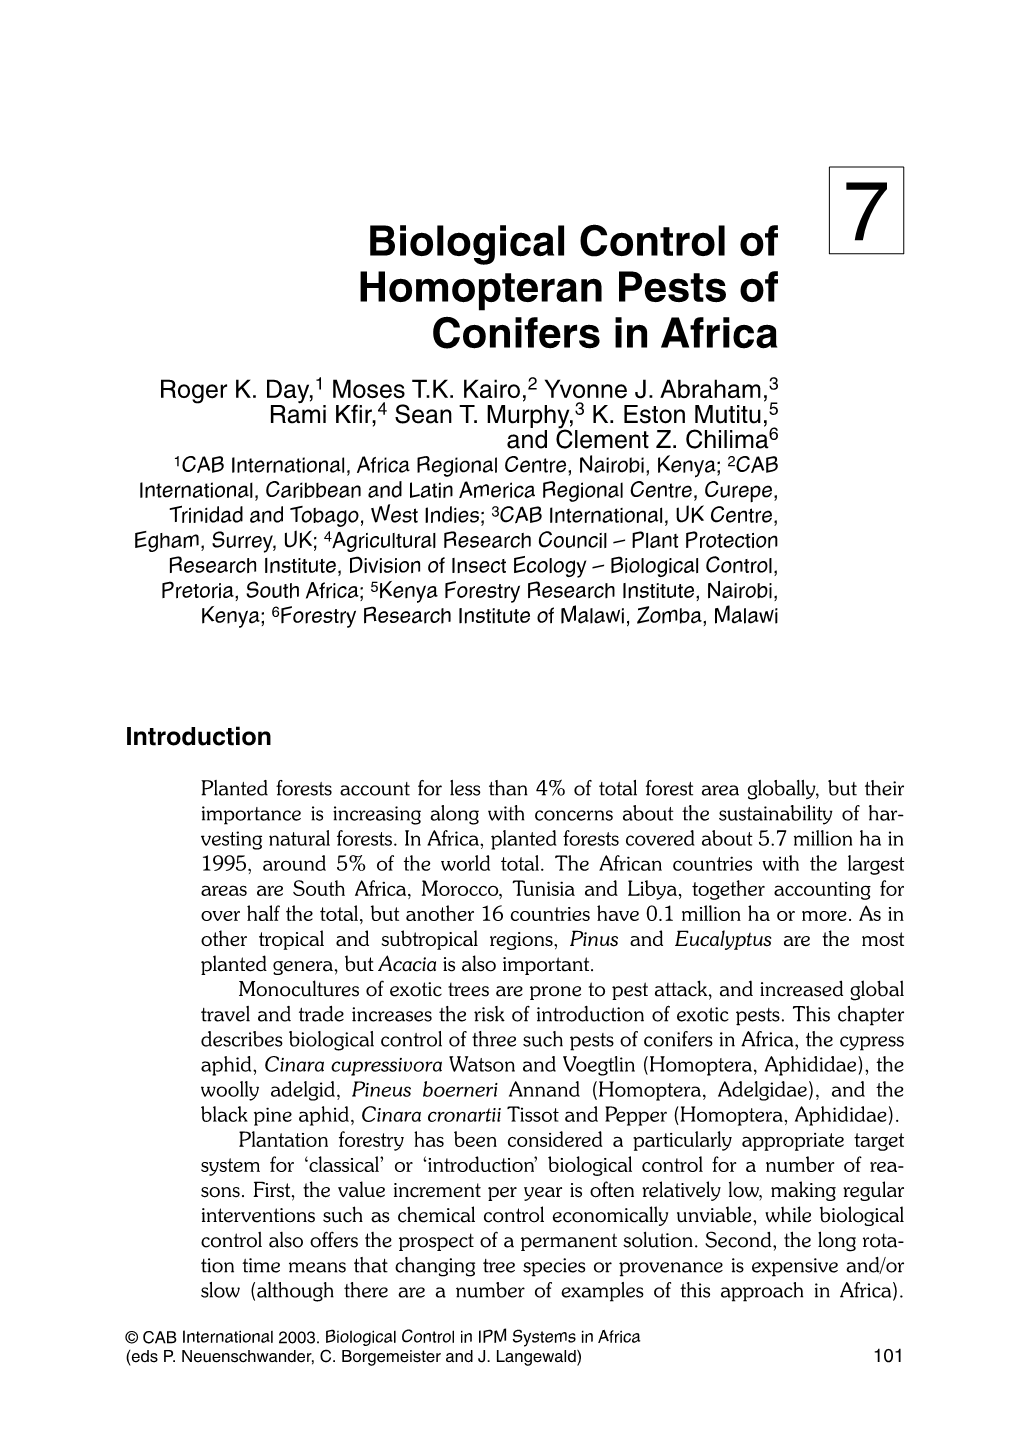 Biological Control of Homopteran Pests of Conifers in Africa